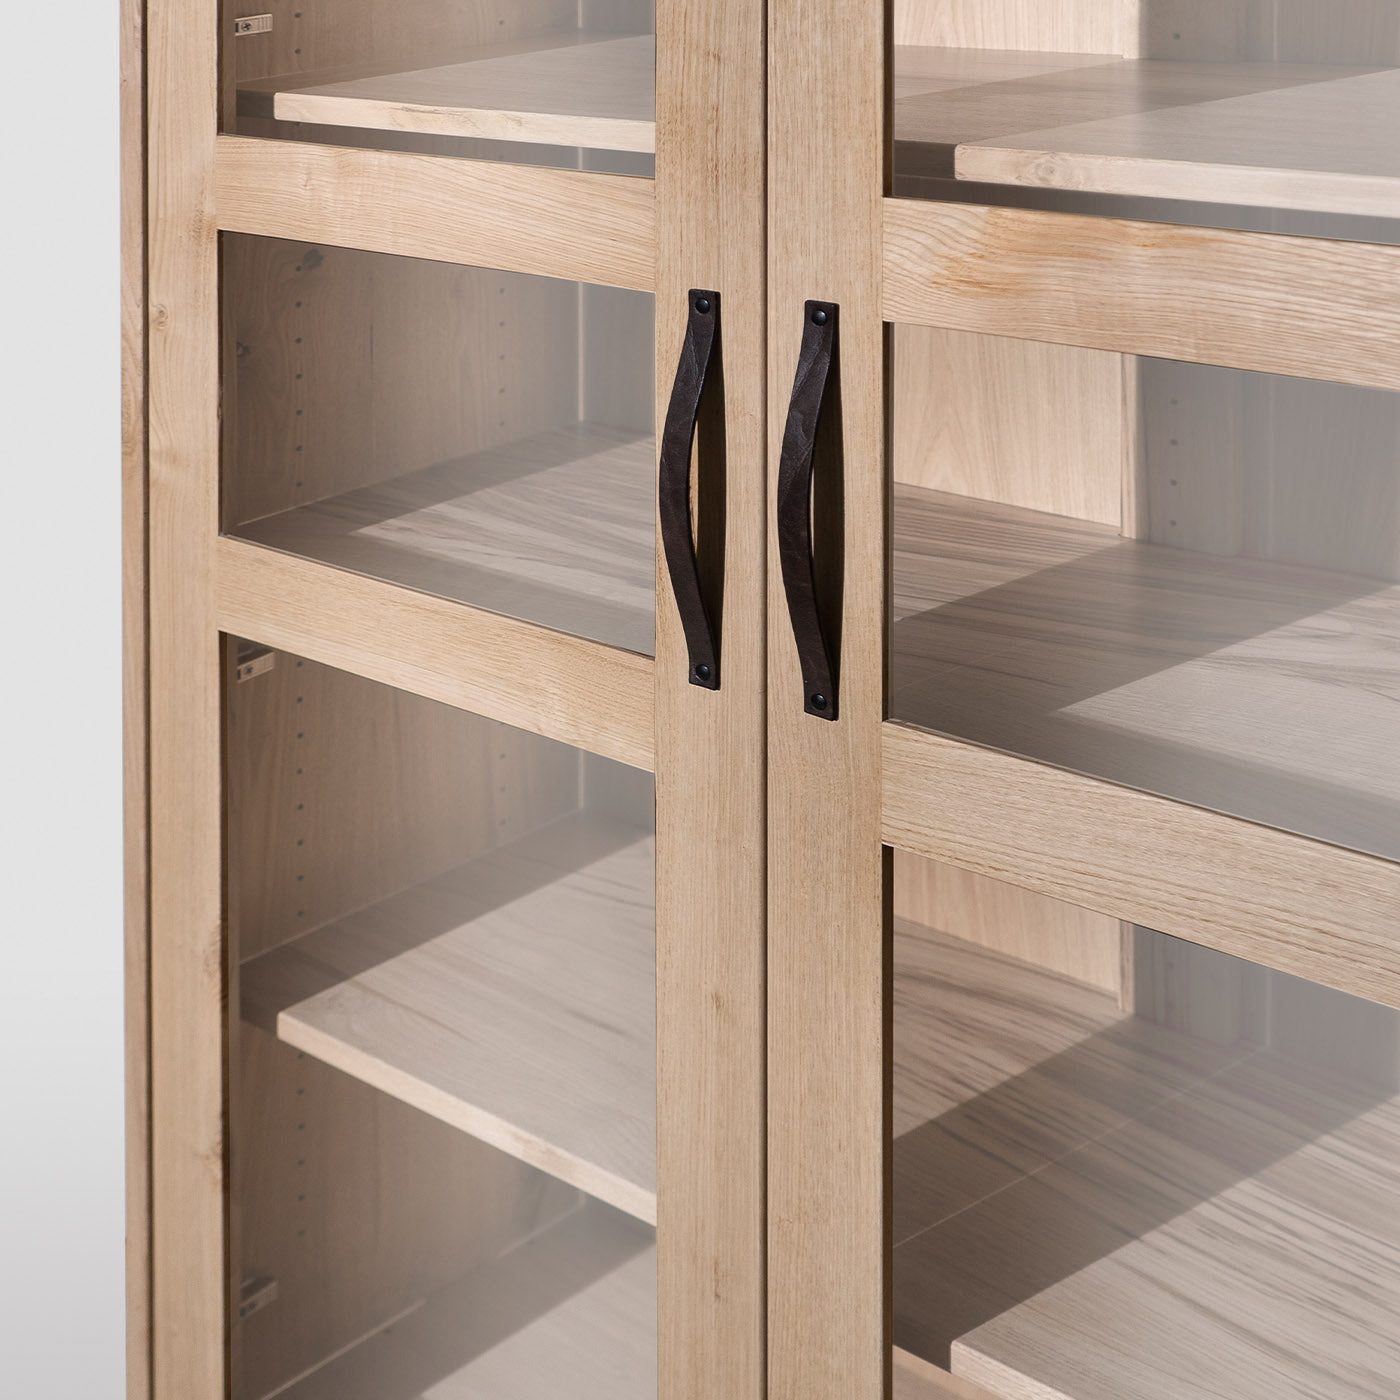 Siv Two-Door Bookcase by Erika Gambella - Alternative view 1